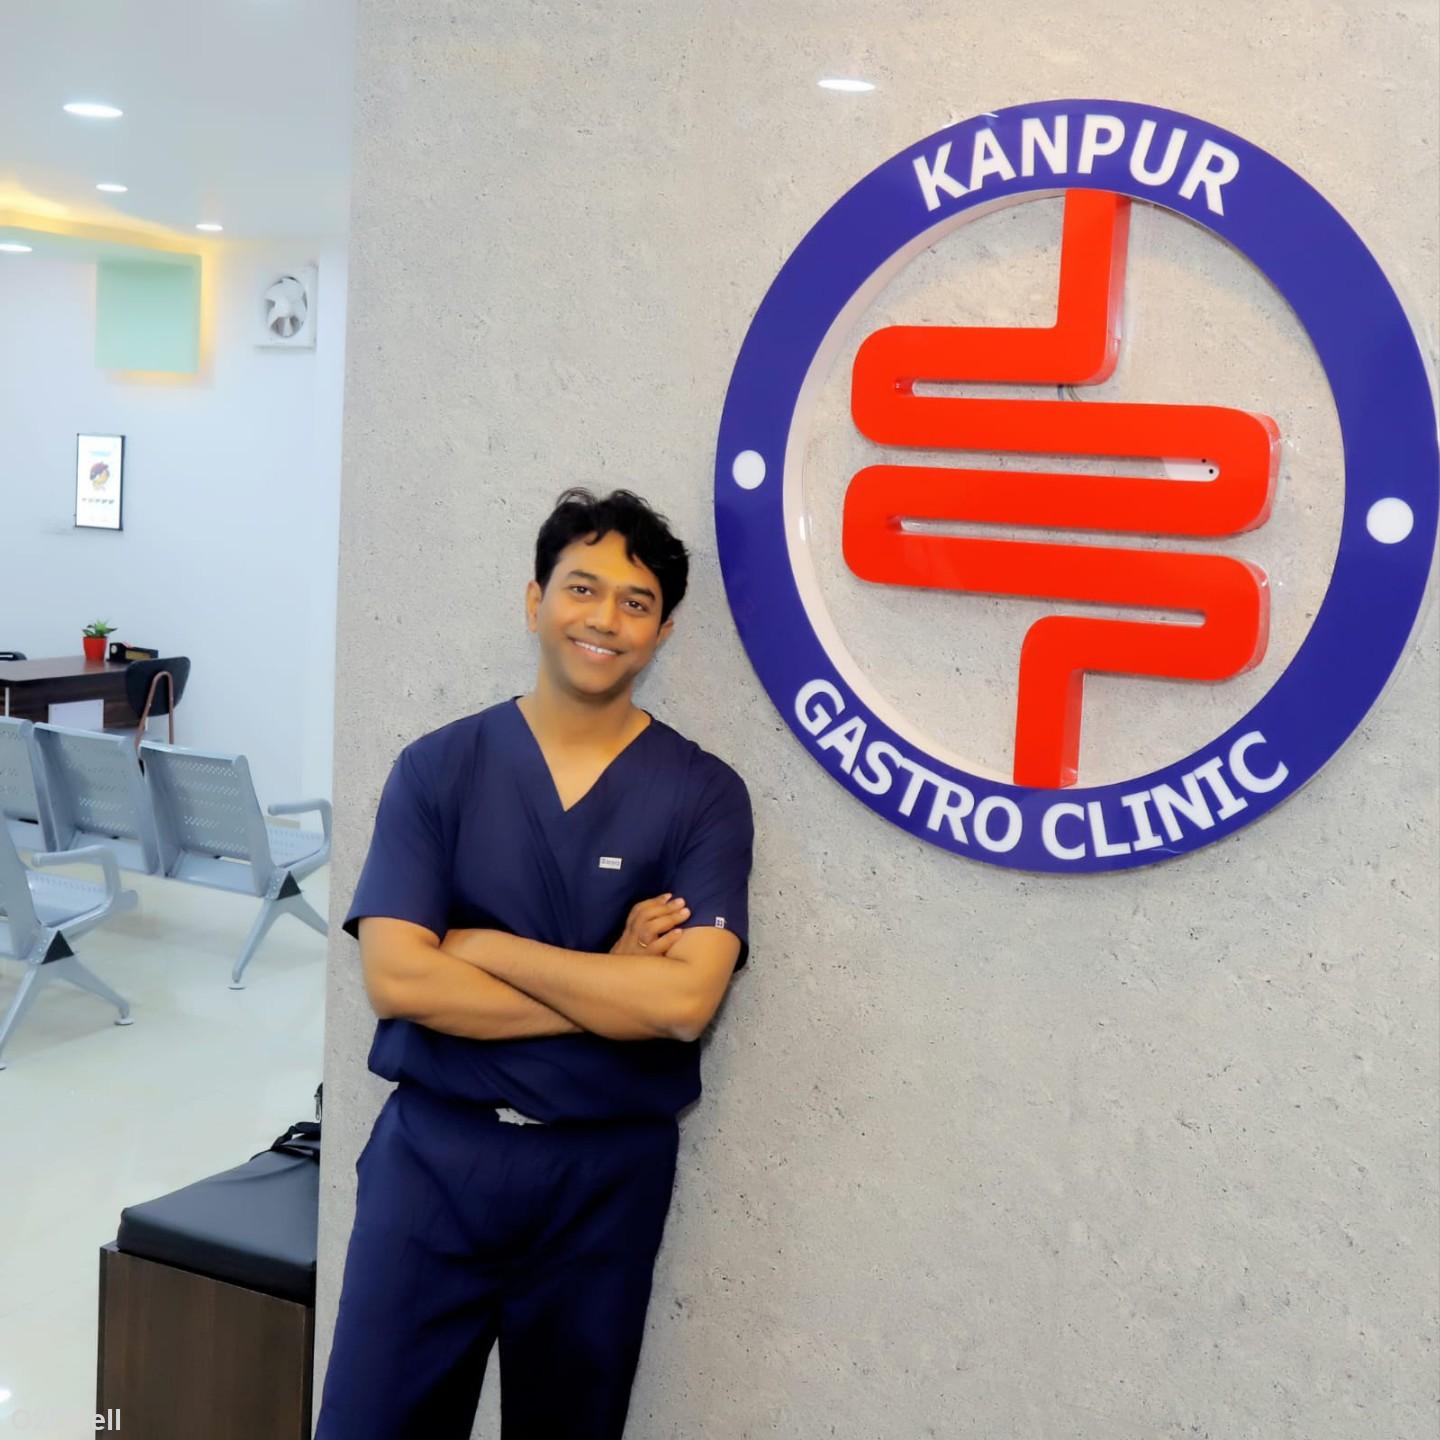 DR RAHUL GUPTA KANPUR GASTRO CLINIC  - Cover Image